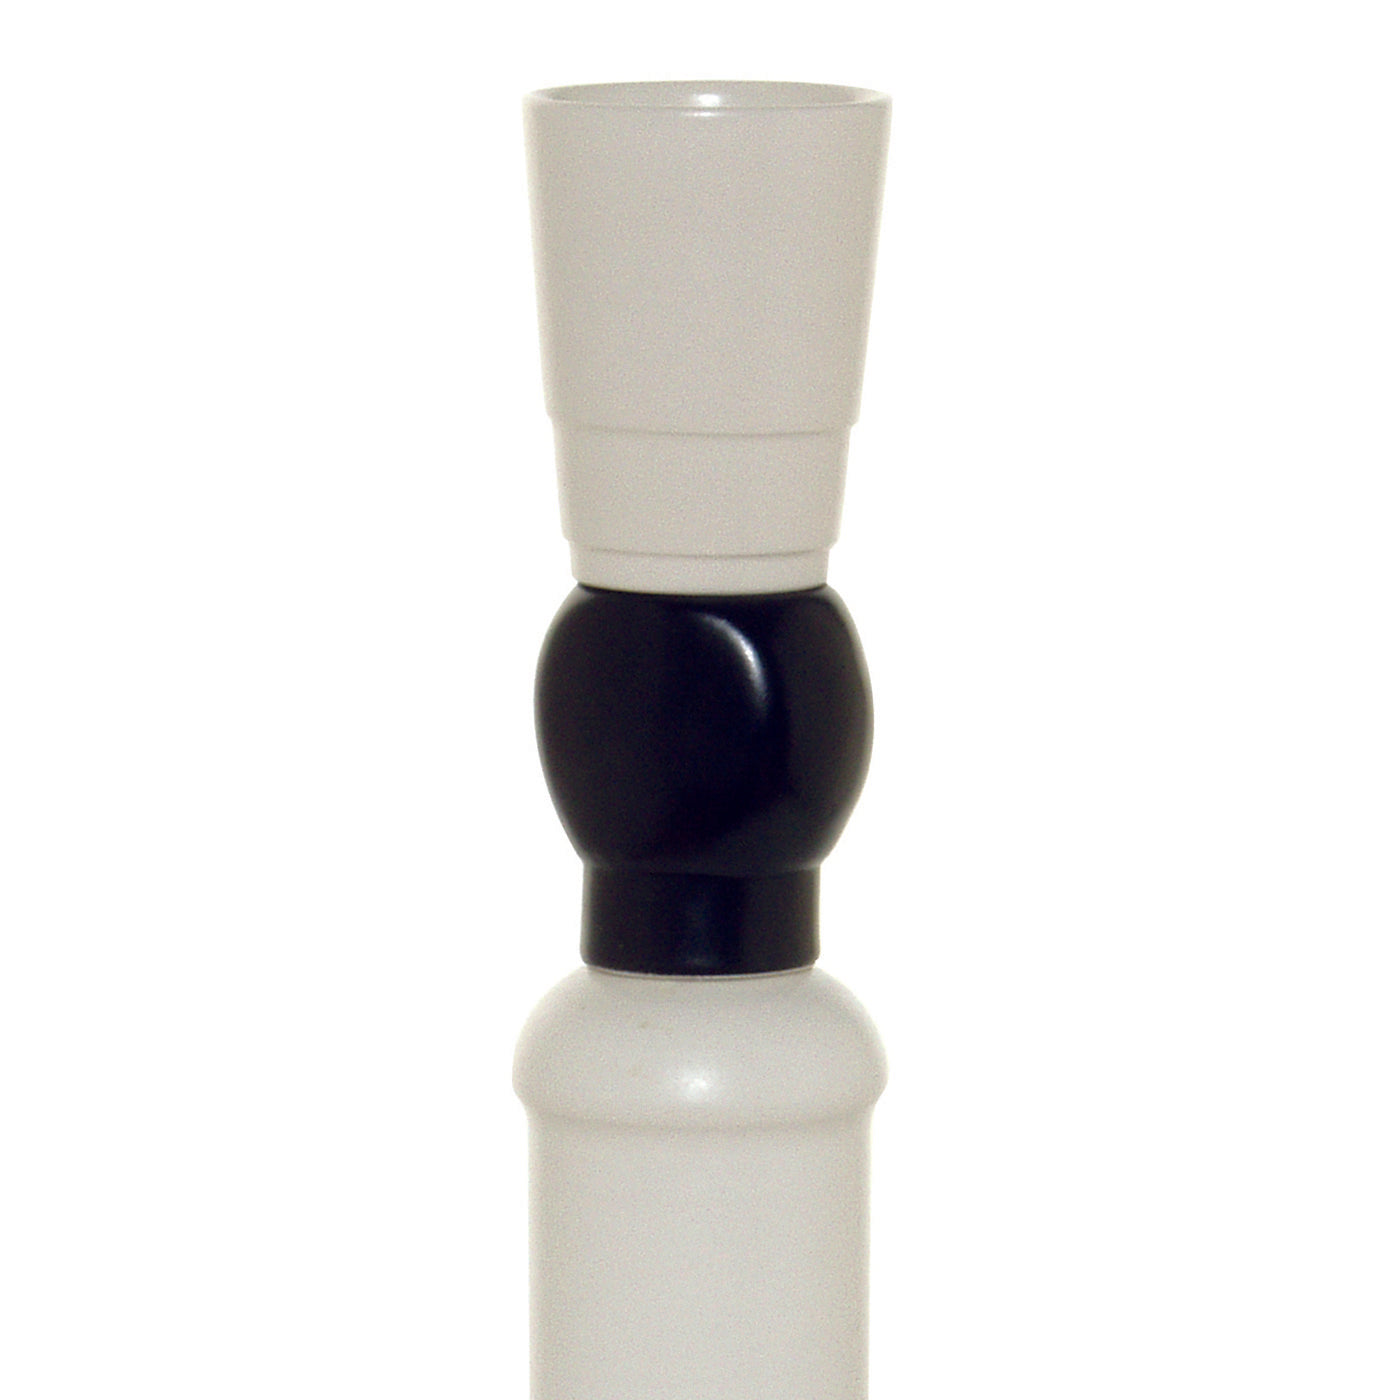 Tall Black and White Vase by Natalie Du Pasquier - Alternative view 1